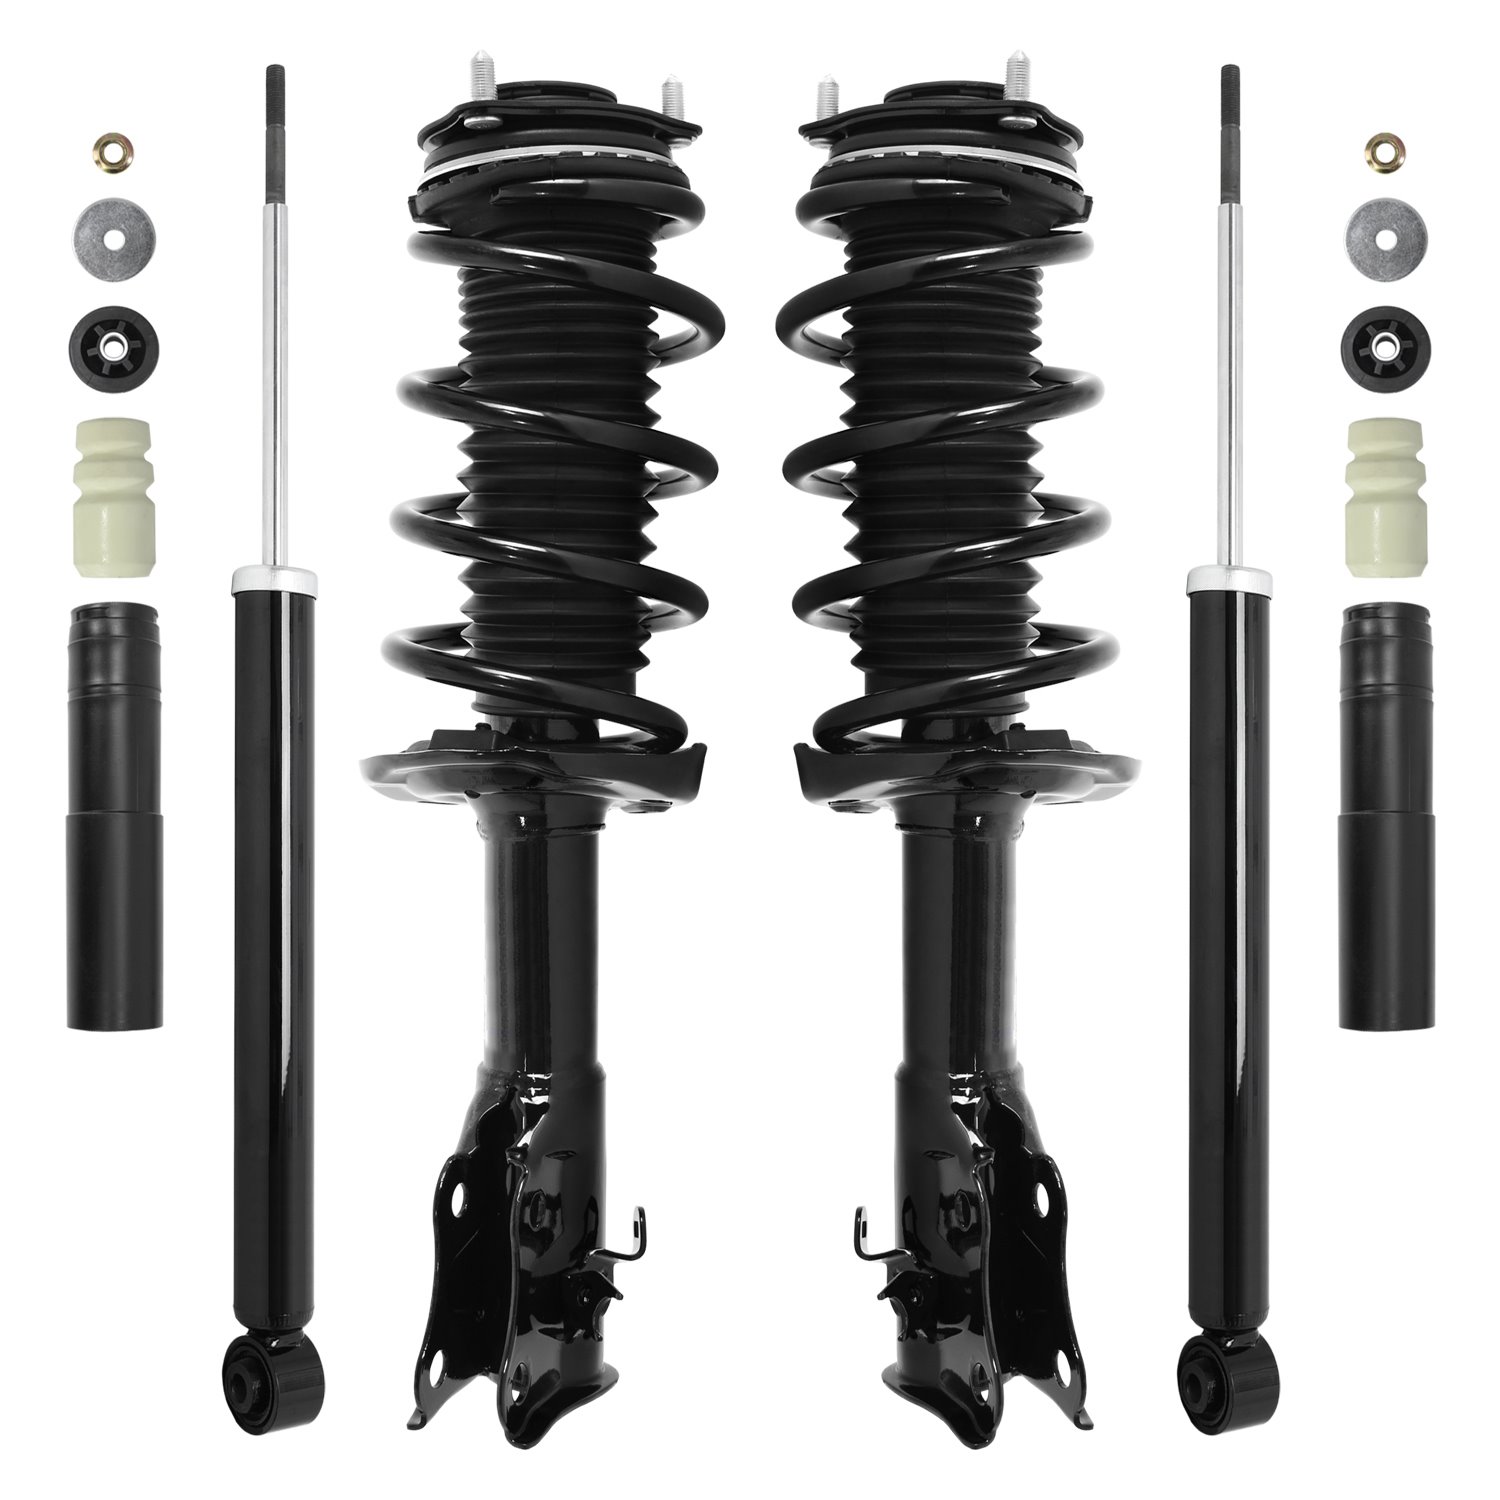 4-11813-253040-001 Front & Rear Suspension Strut & Coil Spring Assembly Fits Select Honda Civic